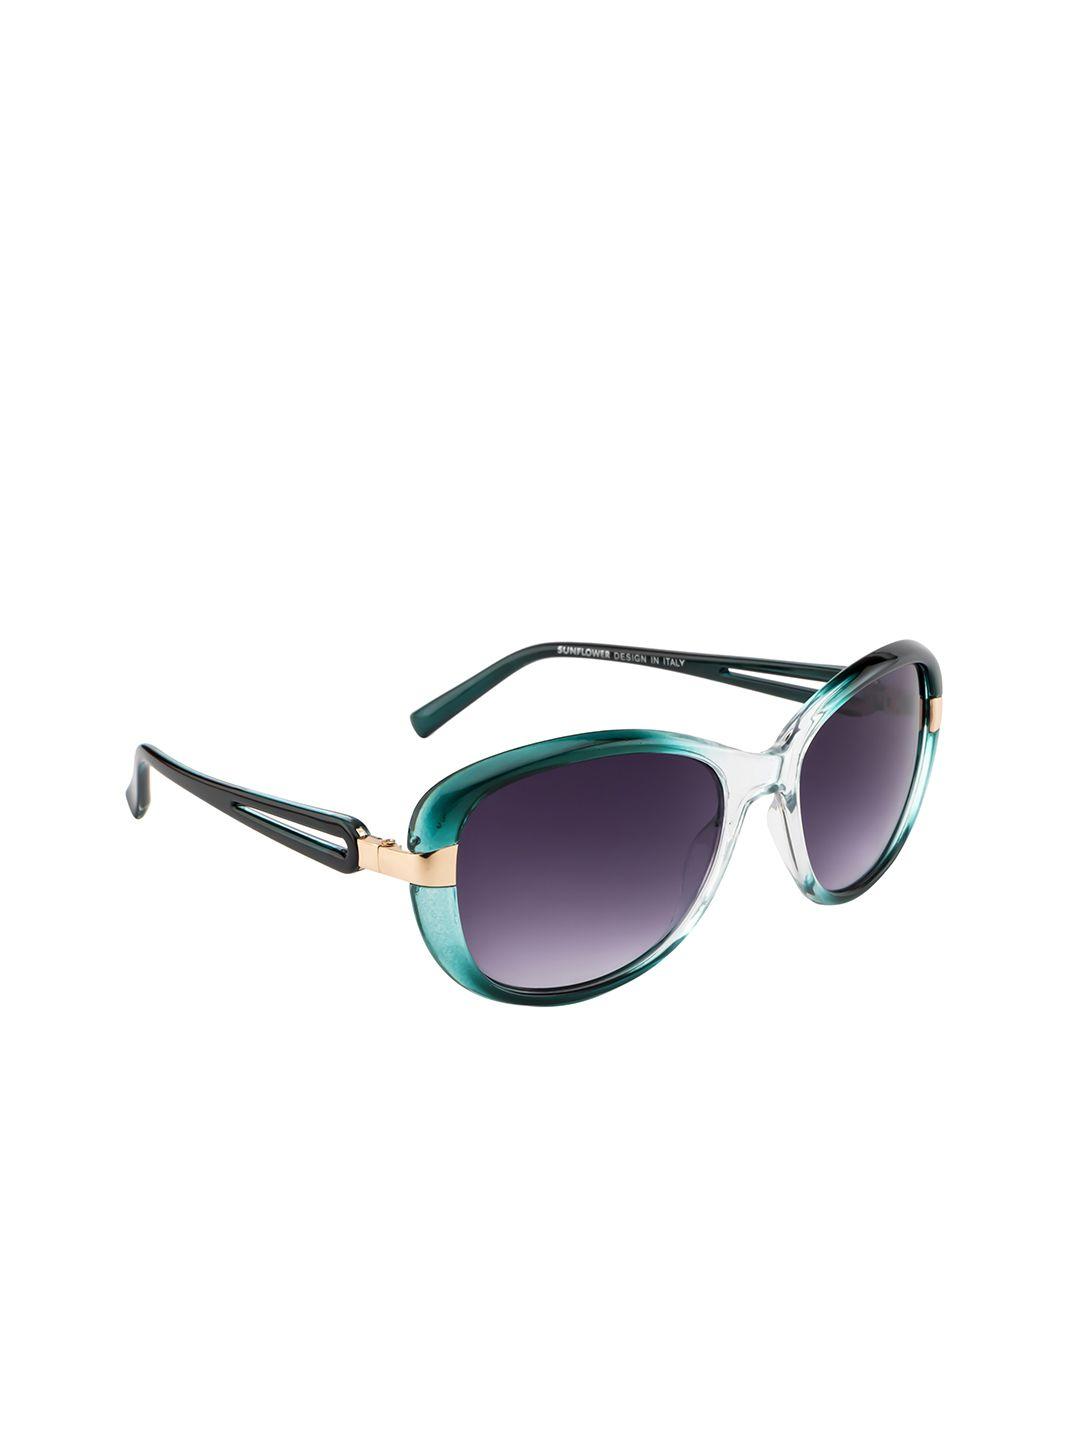 dressberry women grey lens & green oval sunglasses with uv protected lens db-p8560-c5